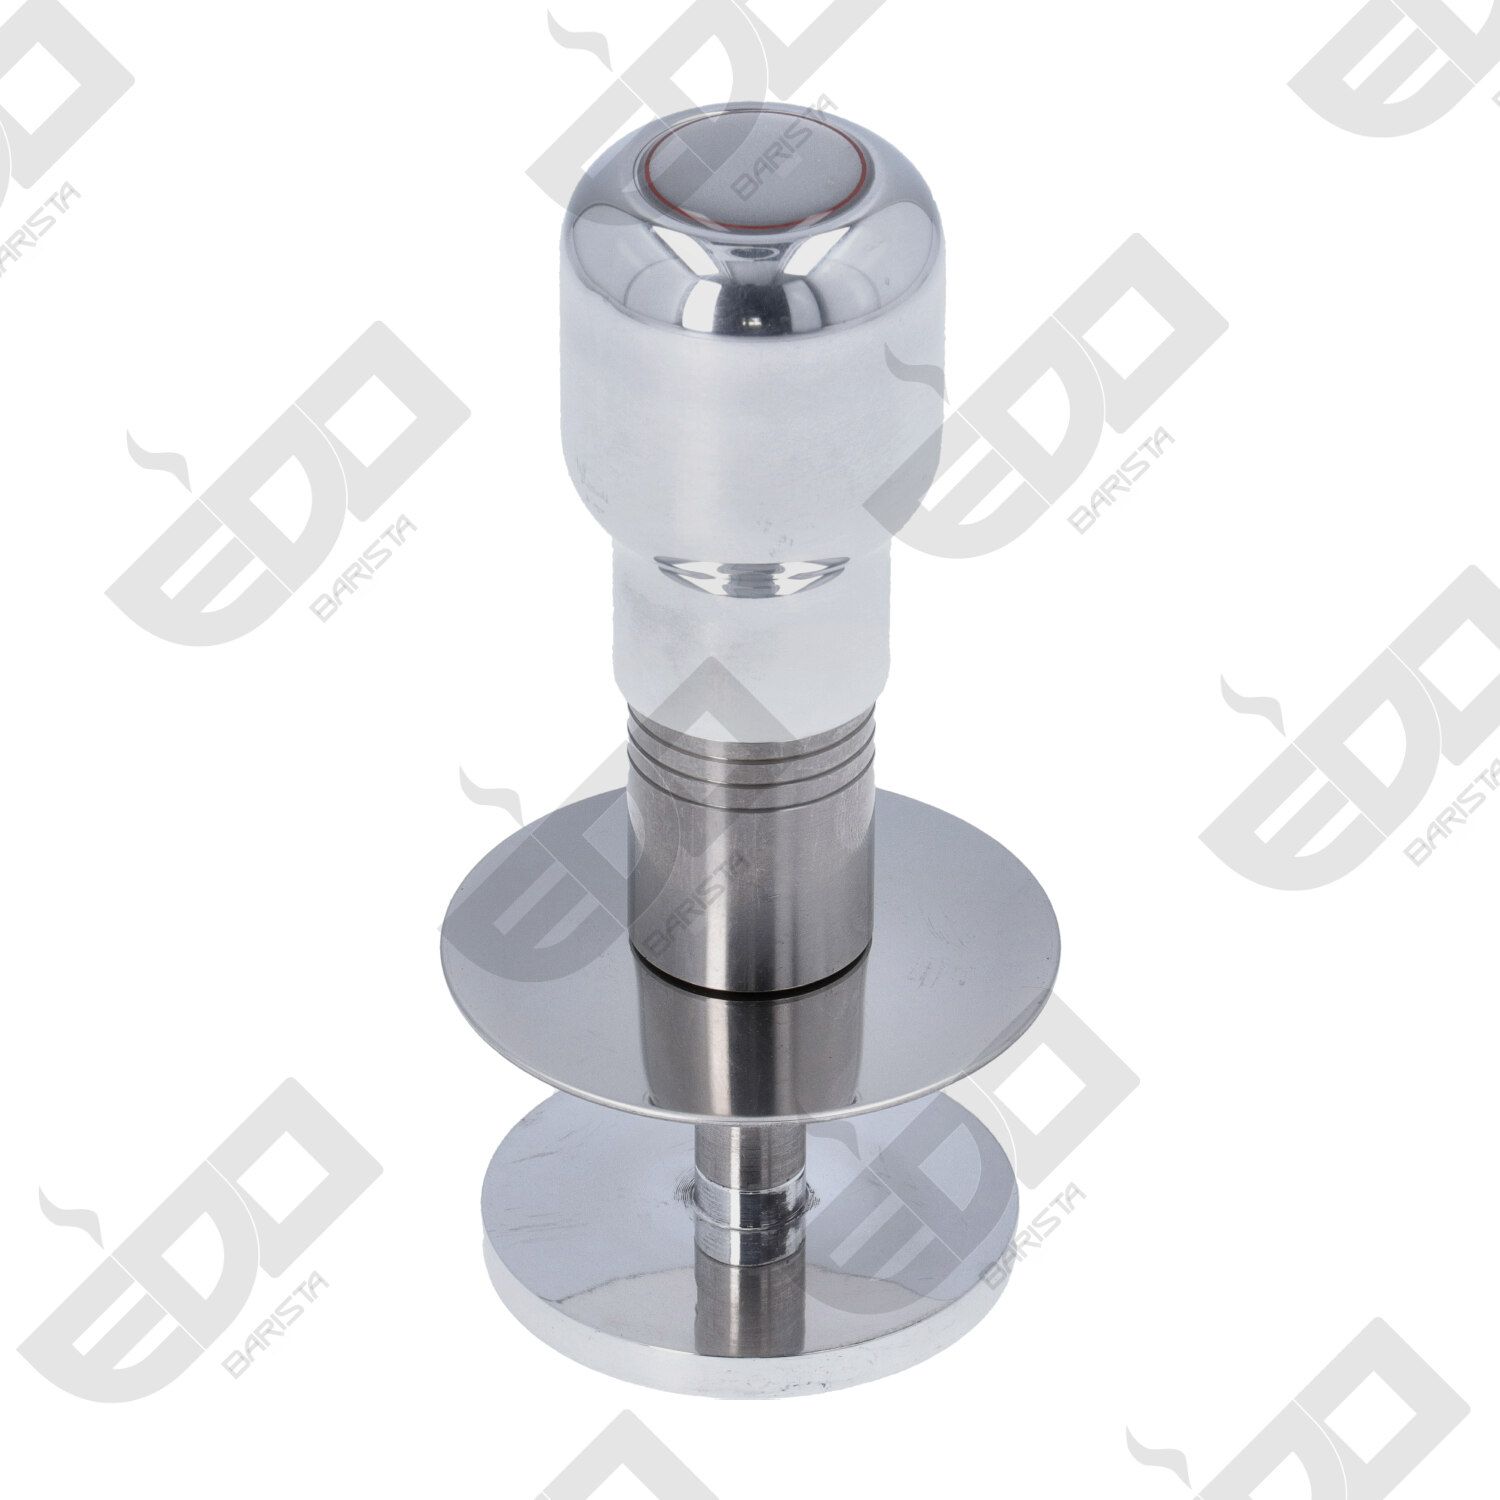 ADJUSTABLE DYNAMOMETRIC TAMPER IN STAINLESS STEEL WITH 58MM ALLUMINIUM DISC